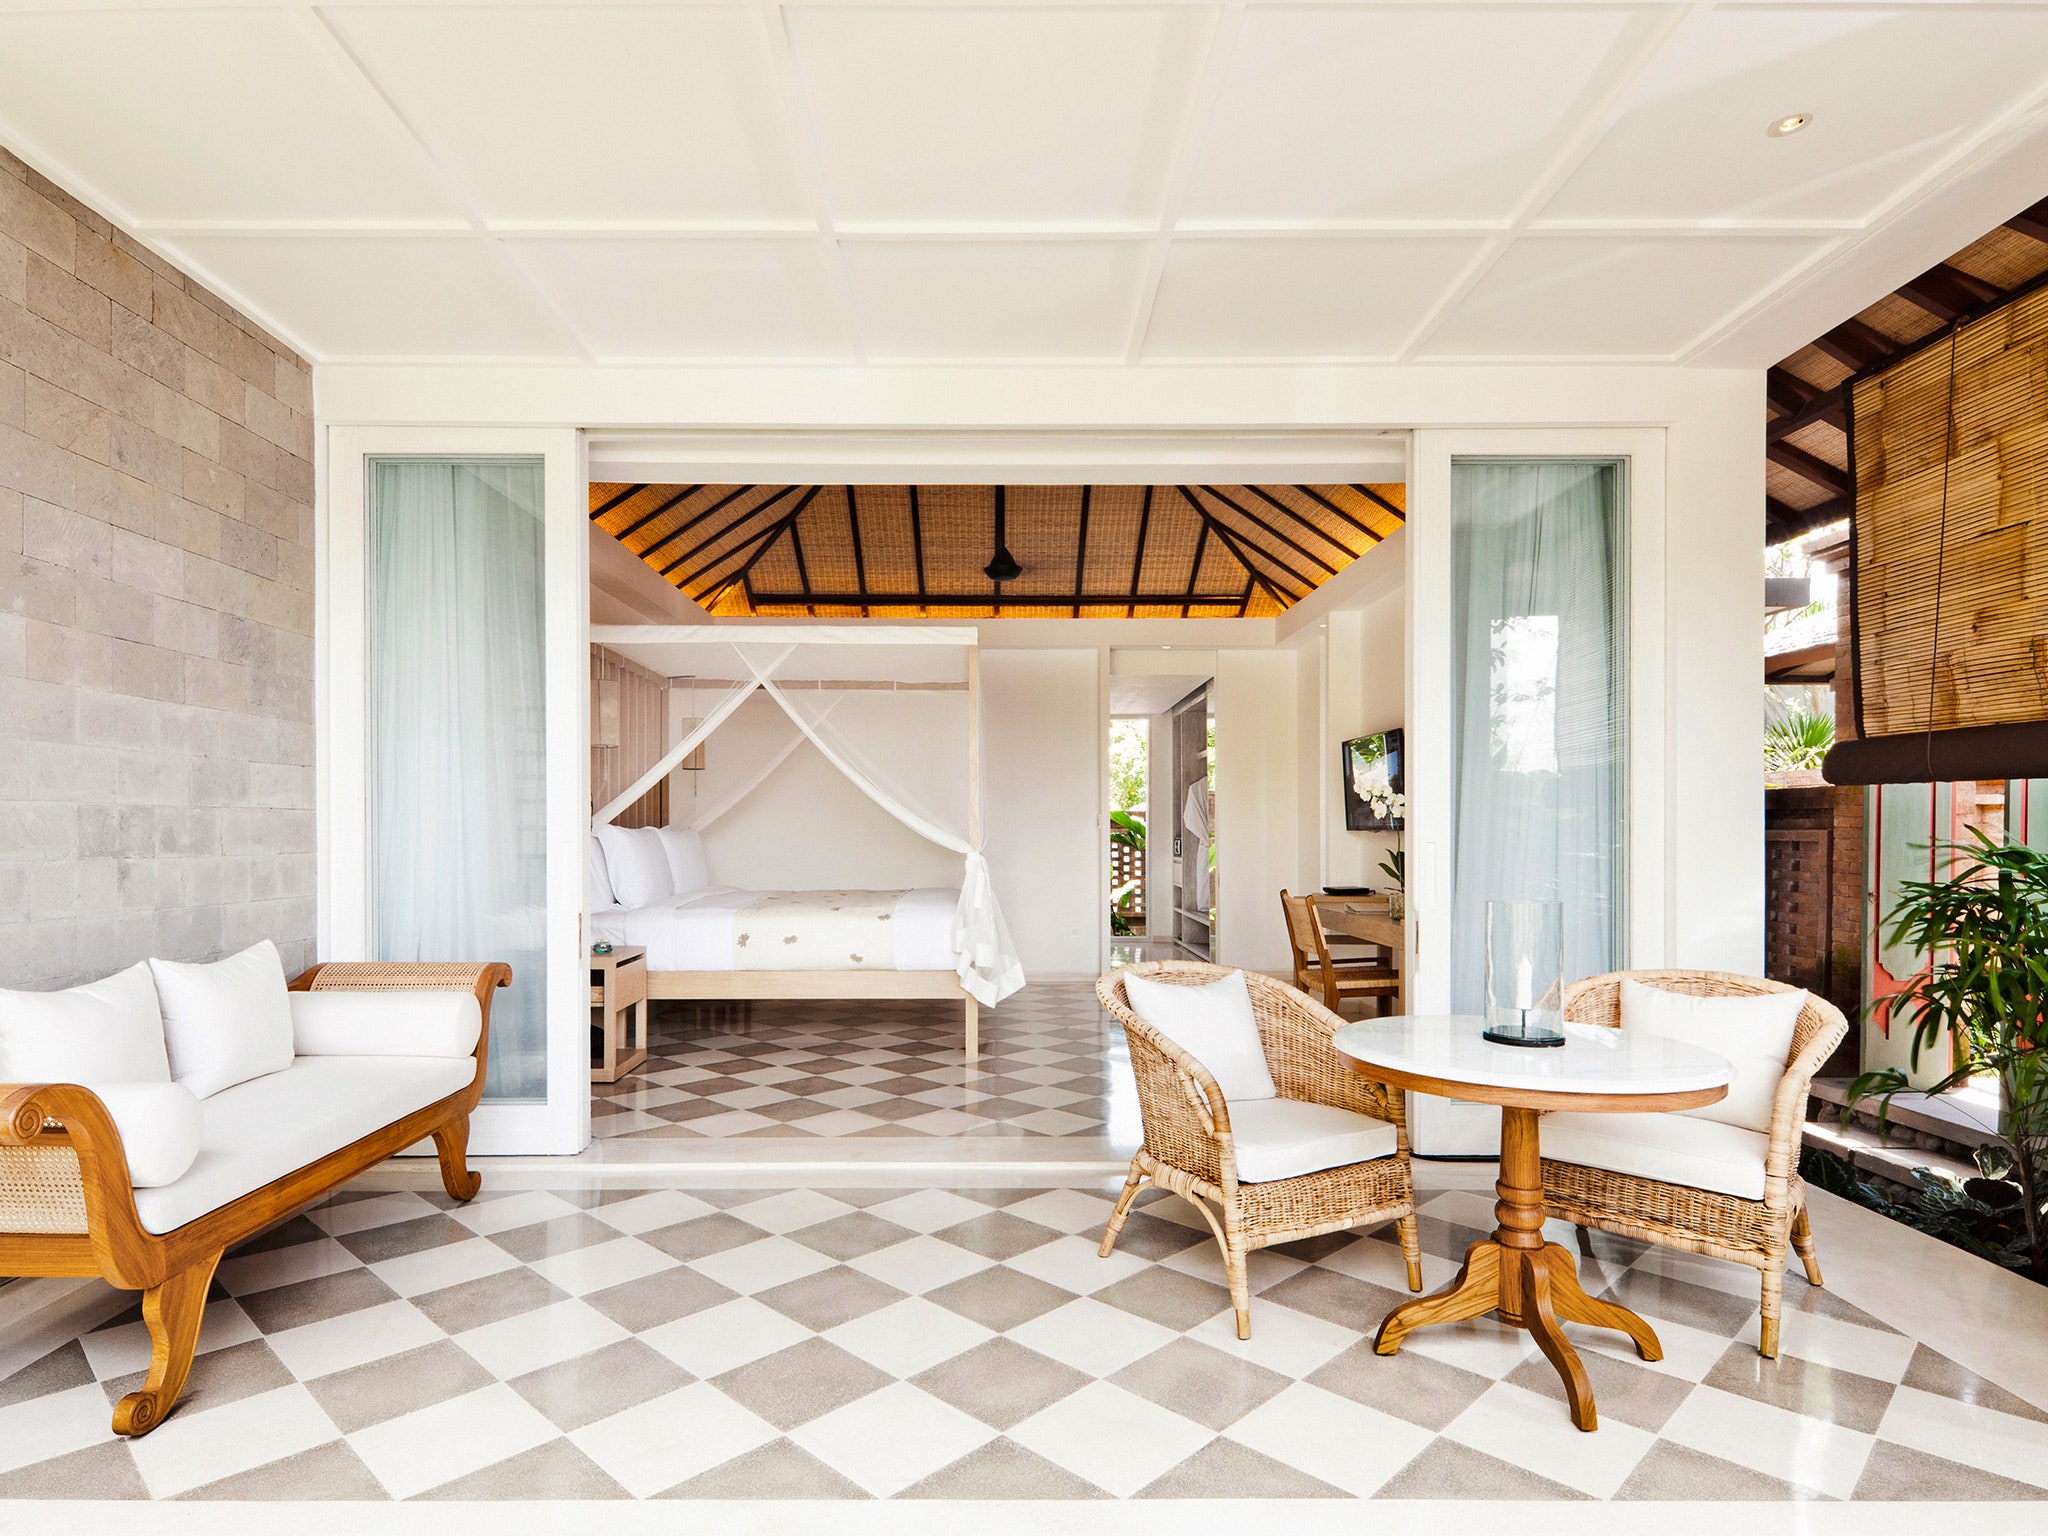 <p>With some 4,300 options to choose from, picking the best <a href="https://www.cntraveler.com/destinations/bali?mbid=synd_msn_rss&utm_source=msn&utm_medium=syndication">Bali</a> hotels is no easy feat. The bar is set high: On this island blessed with postcard scenes around every bend, even the most basic Bali villas and bungalows offer dreamy views and innovative designs from bamboo and volcanic rock. There are countless hidey-holes dotting the jungles around Ubud, cliffside villas in Uluwatu, and clubby beach retreats lining the coast from Seminyak to Kuta, but only some manage to stand out with extraordinary settings, service, or amenities. From the classic big-hitters to whip-smart new arrivals, we've tried, tested, and whittled down the best hotels in Bali to book right now.</p> <p><em>This gallery has been updated with new information since its original publish date.</em></p><p>Sign up to receive the latest news, expert tips, and inspiration on all things travel</p><a href="https://www.cntraveler.com/newsletter/the-daily?sourceCode=msnsend">Inspire Me</a>